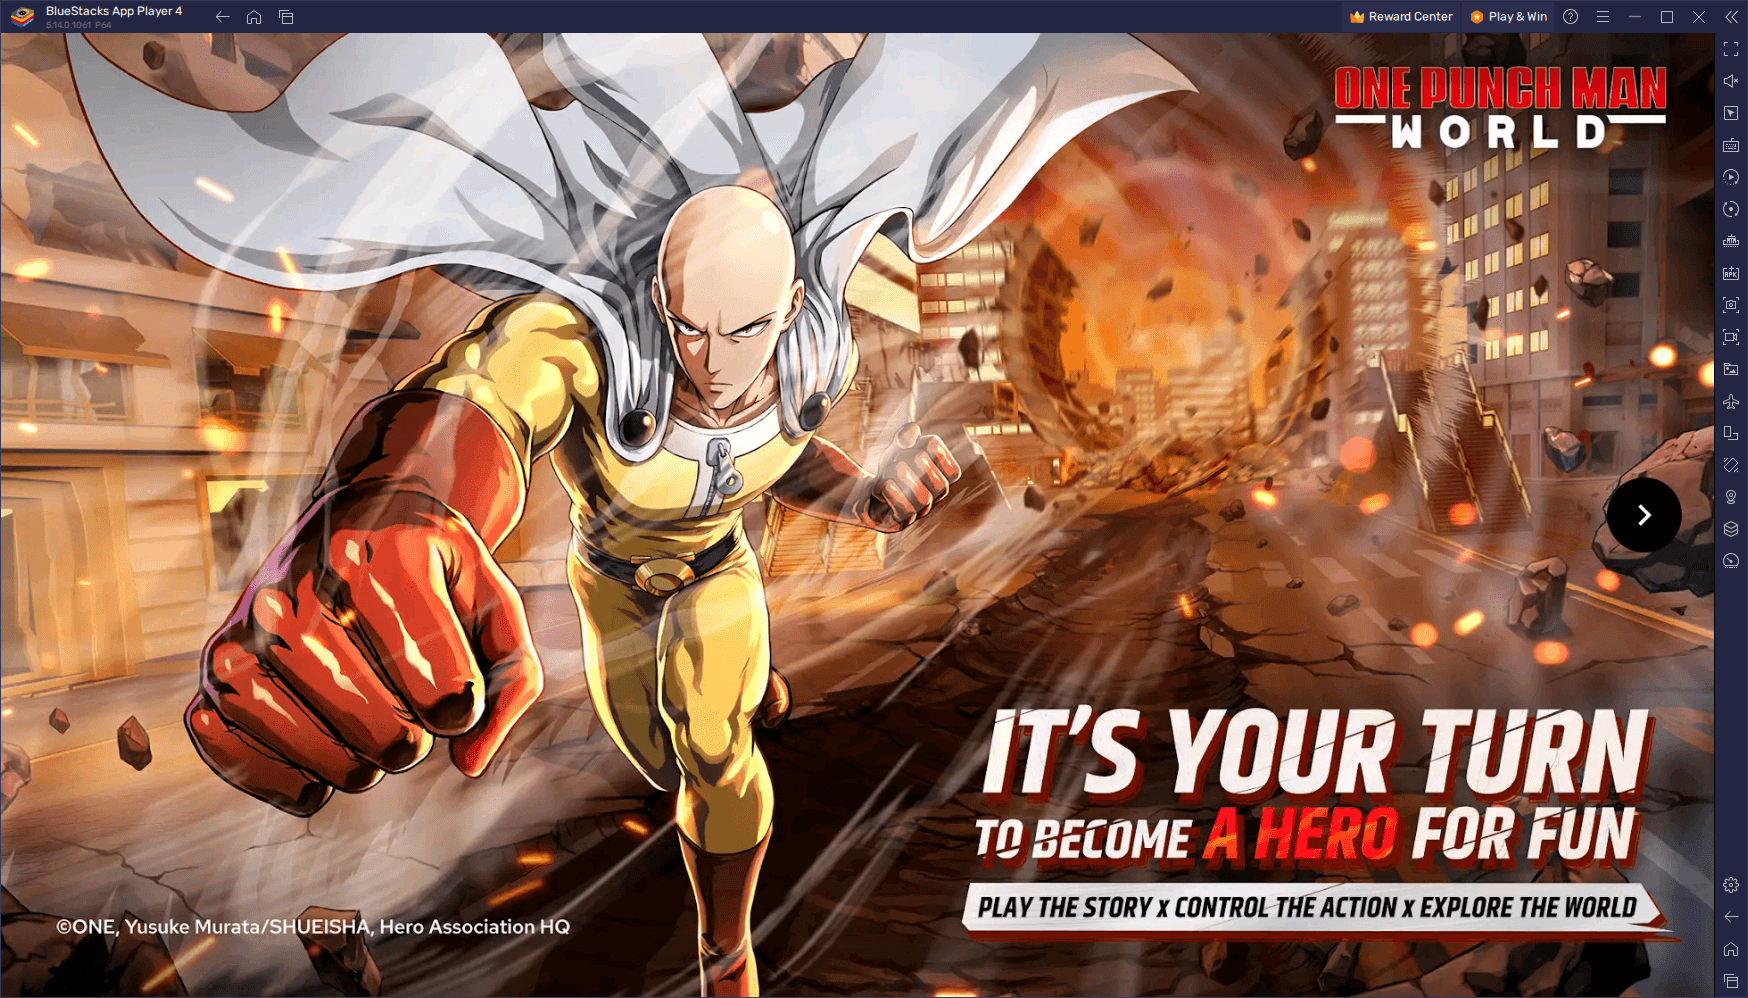 One Punch Man World Preview – Everything We Know Ahead of the February 1 Launch